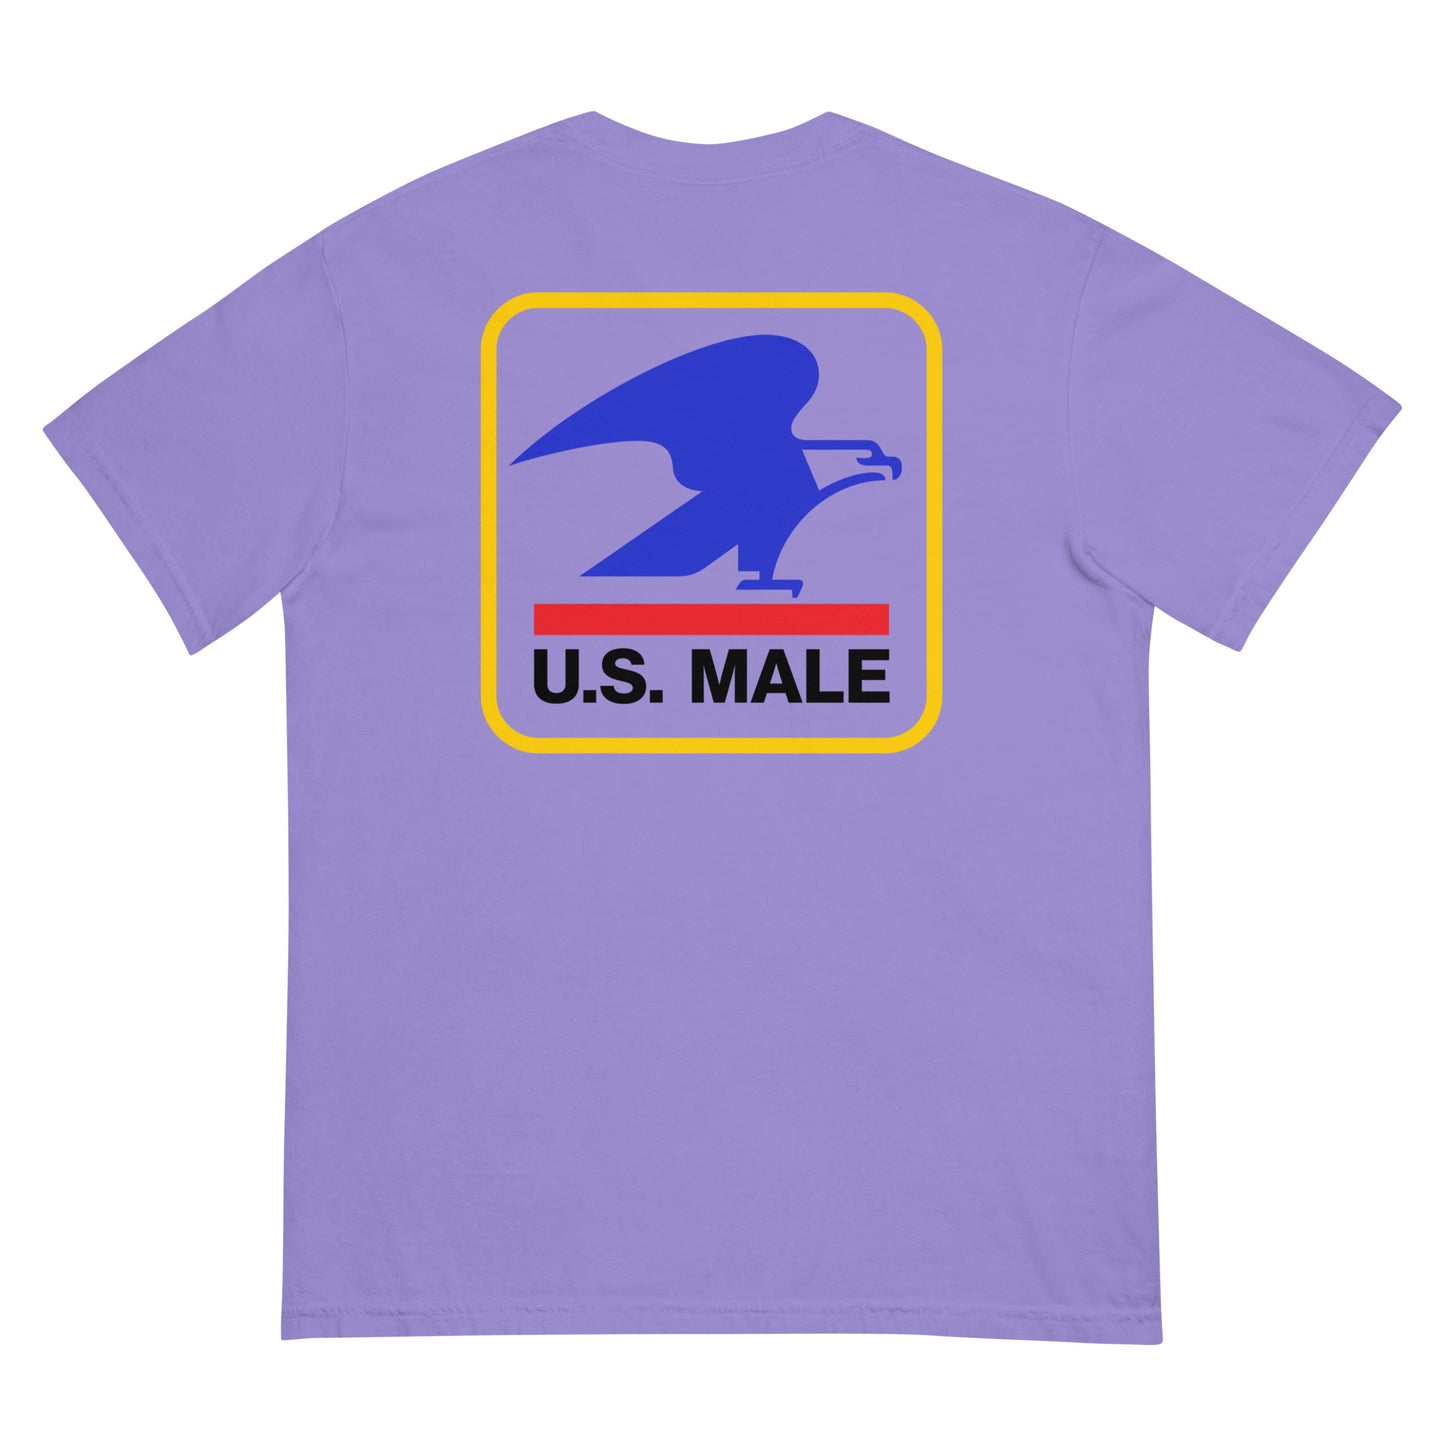 U.S. MALE Front/Back